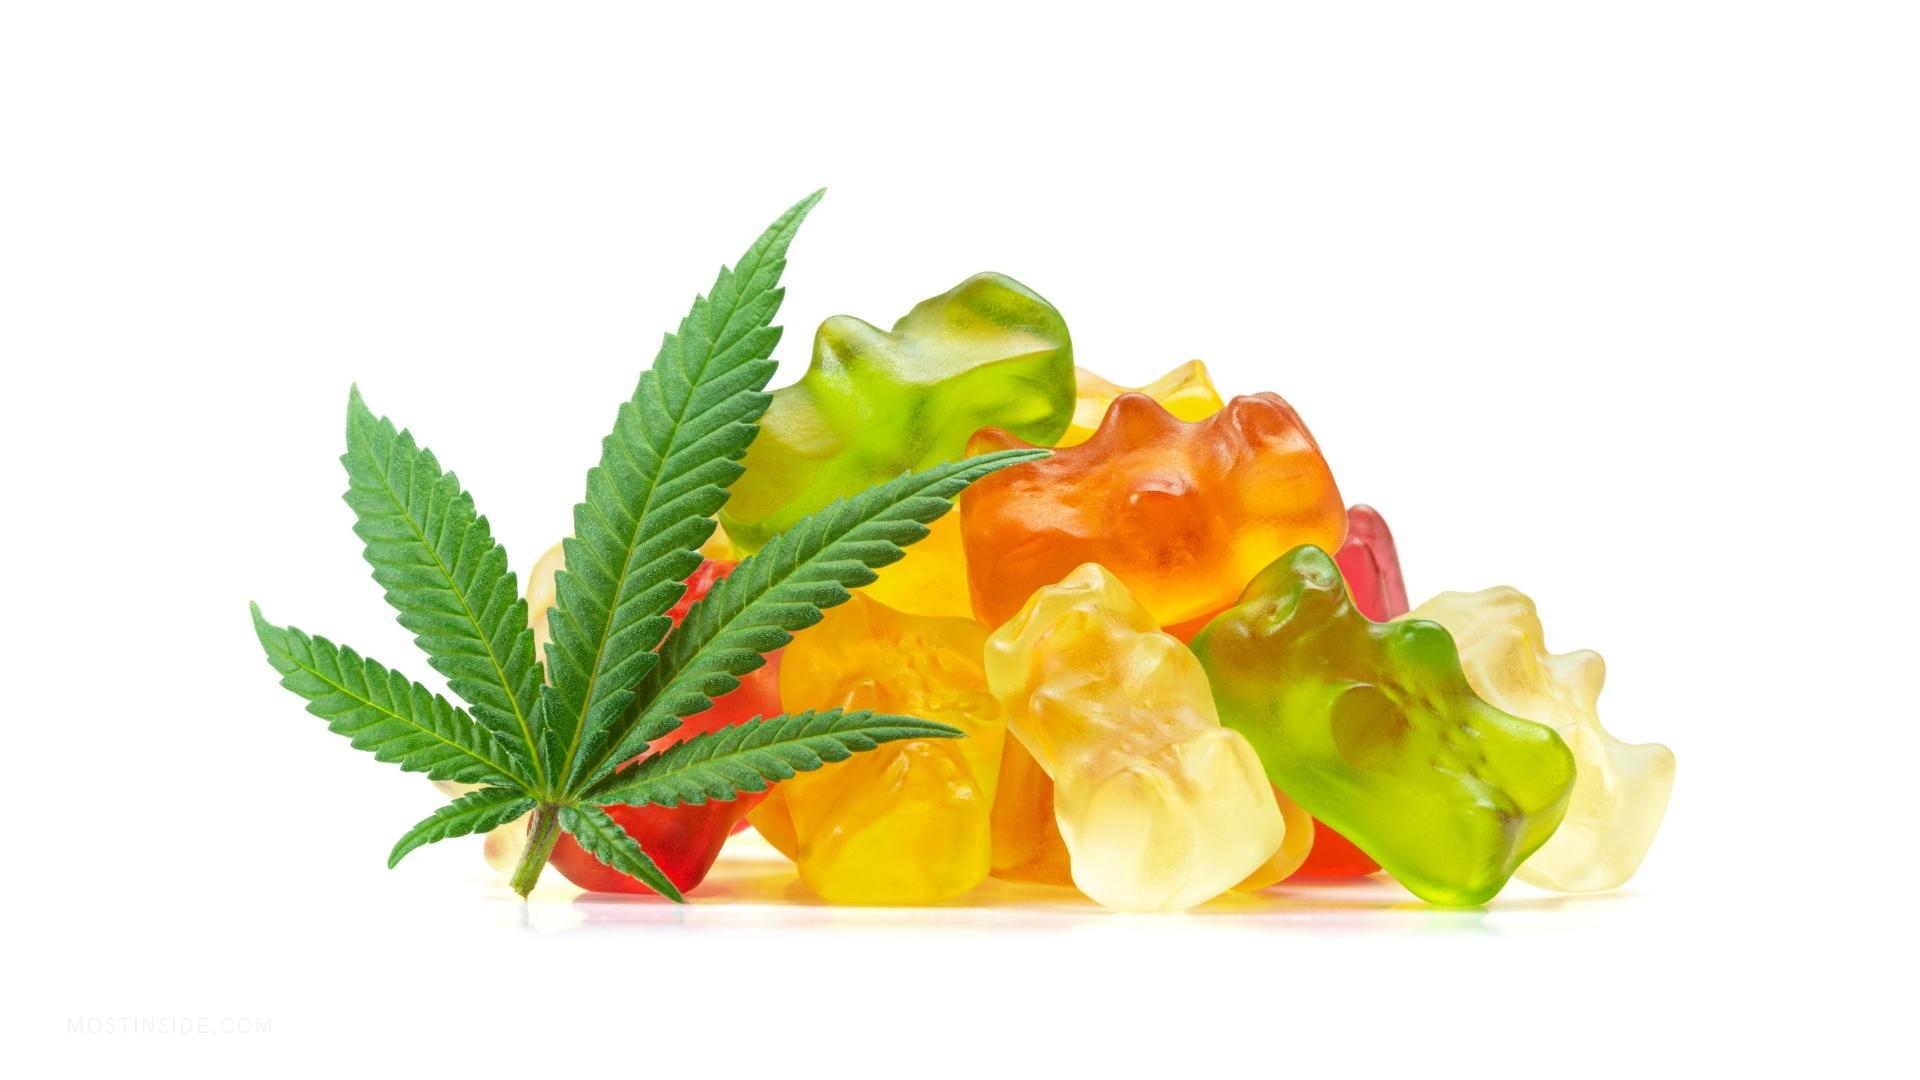 Reasons To Add CBD Edibles To Your Wellness Routine